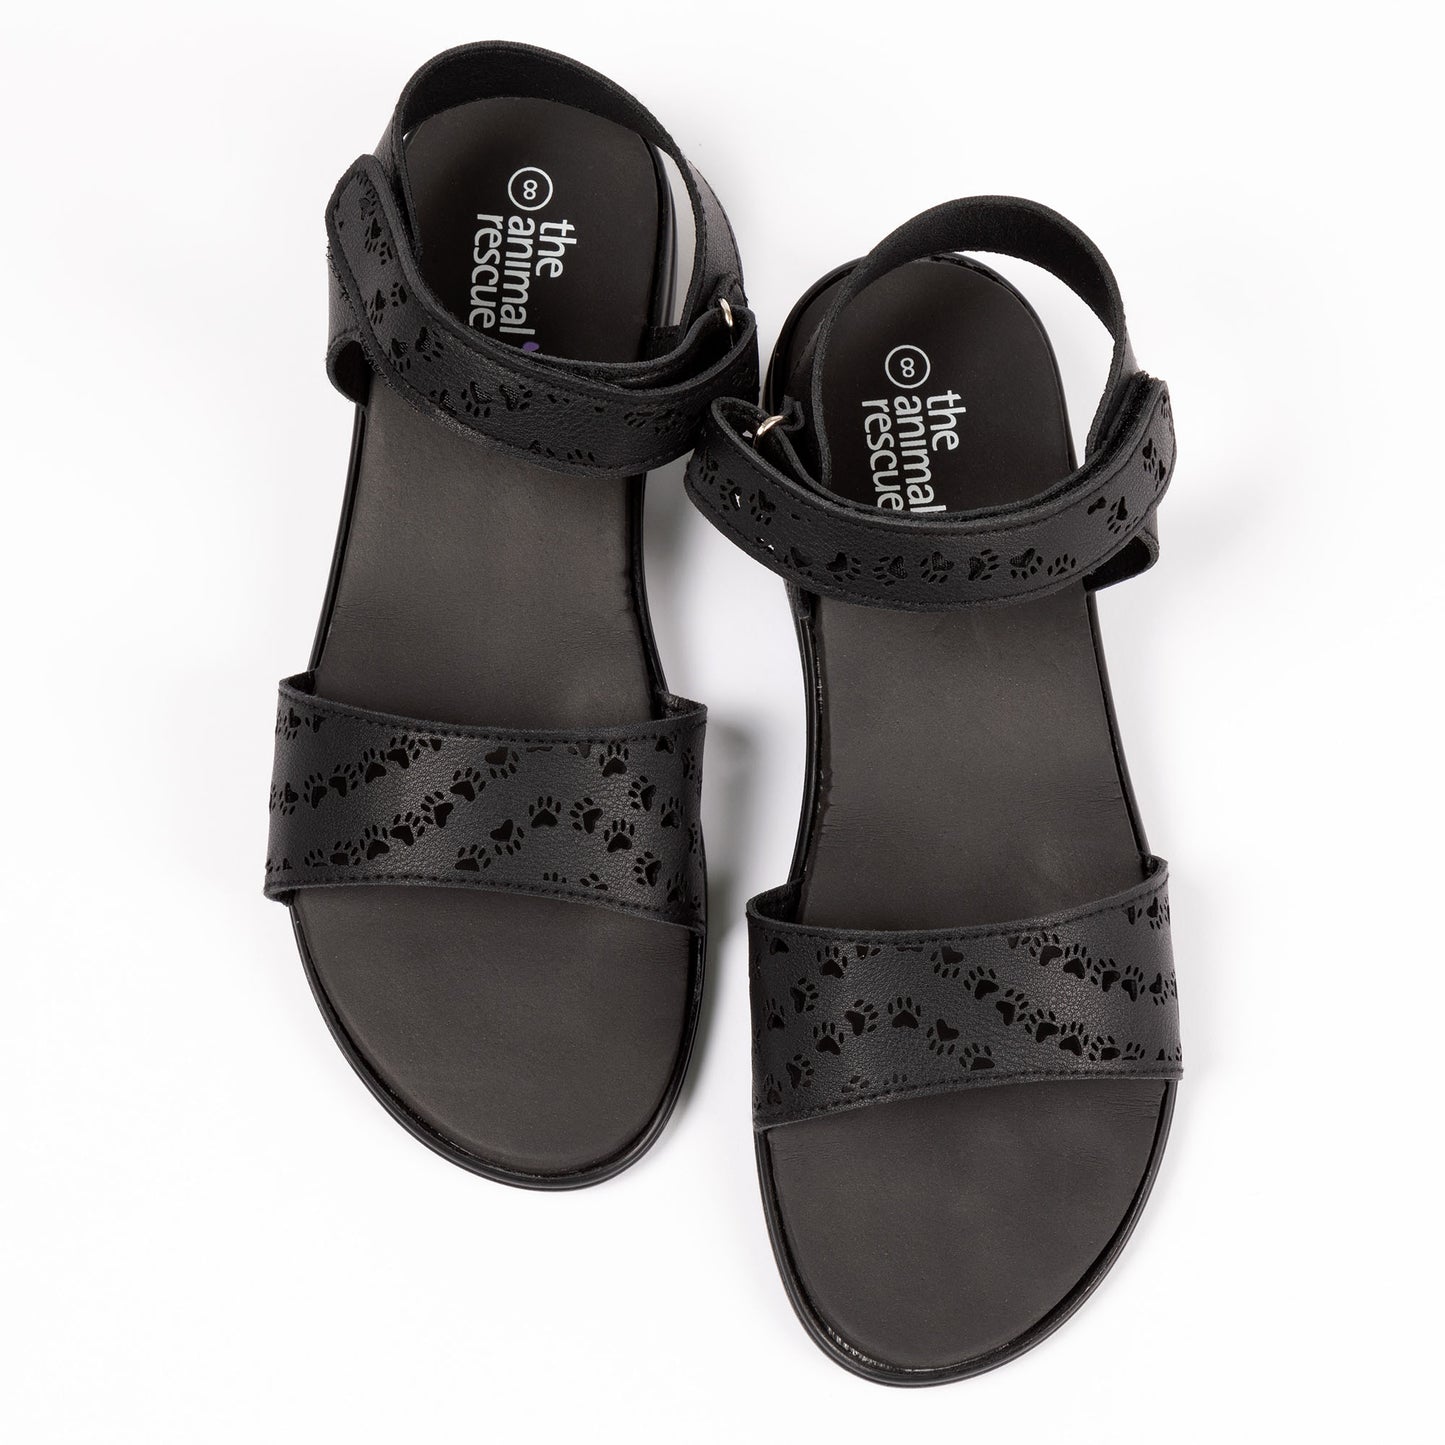 Paw Print Faux Leather Strap Sandals